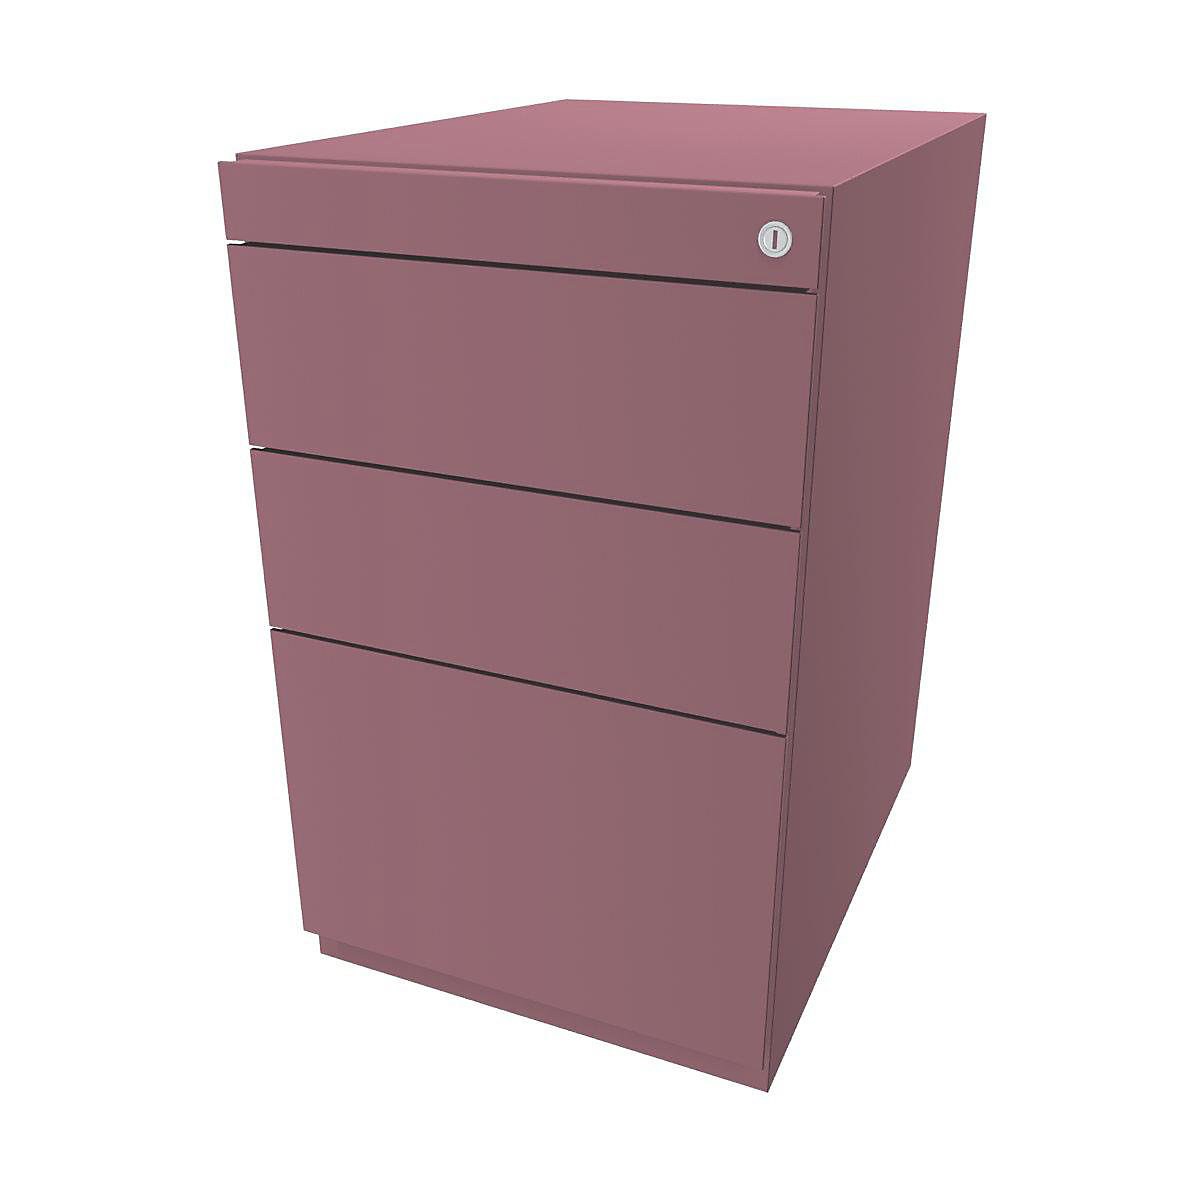 Note™ fixed pedestal, with 2 universal drawers, 1 suspension file drawer – BISLEY, without top, depth 565 mm, pink-14